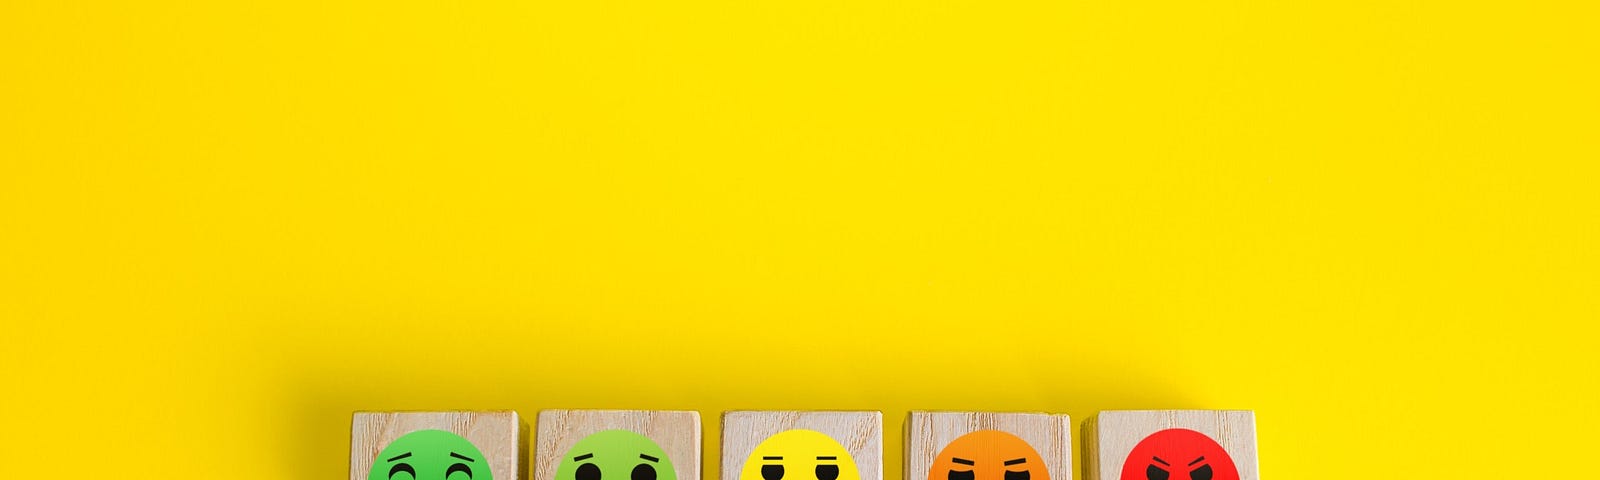 Blocks bearing a range of emotional faces (from happy to angry) sit against a yellow background.